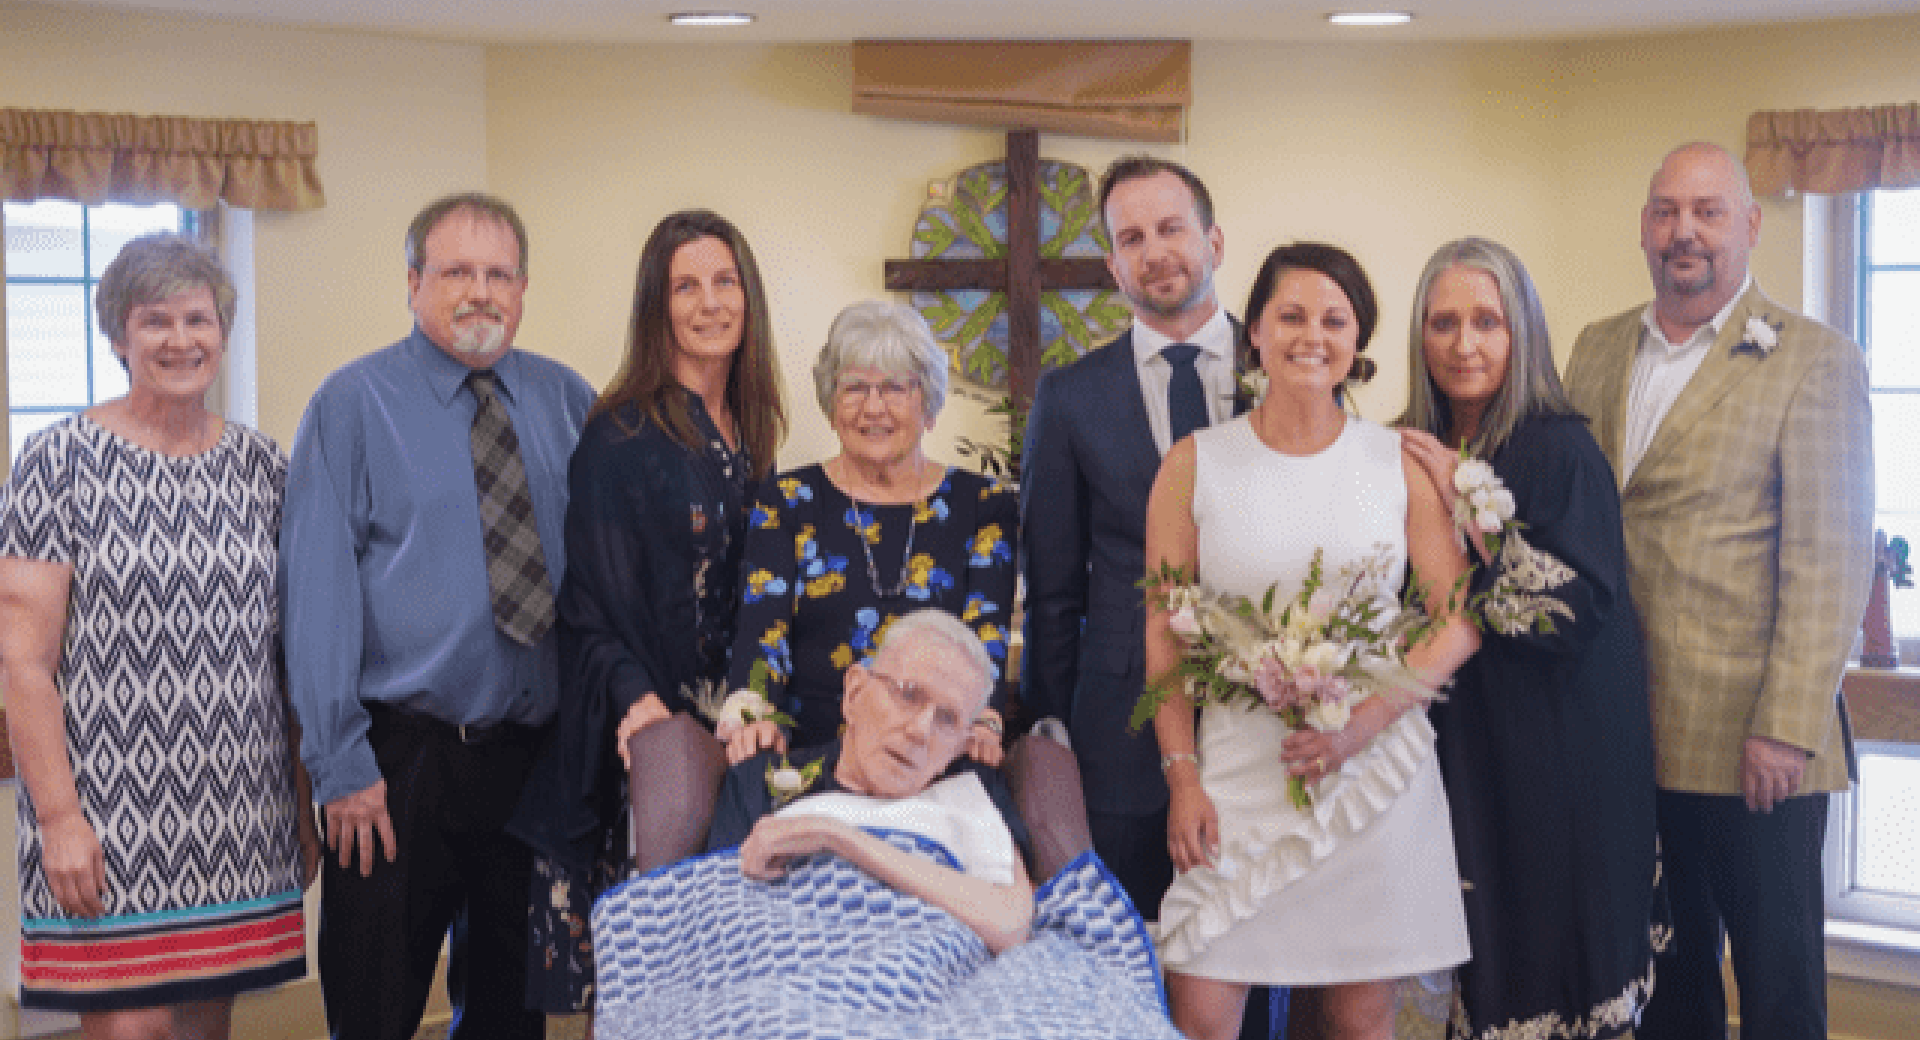 Going to the Chapel: Rainbow Chaplain Officiates Wedding for Son of Hospice Patient